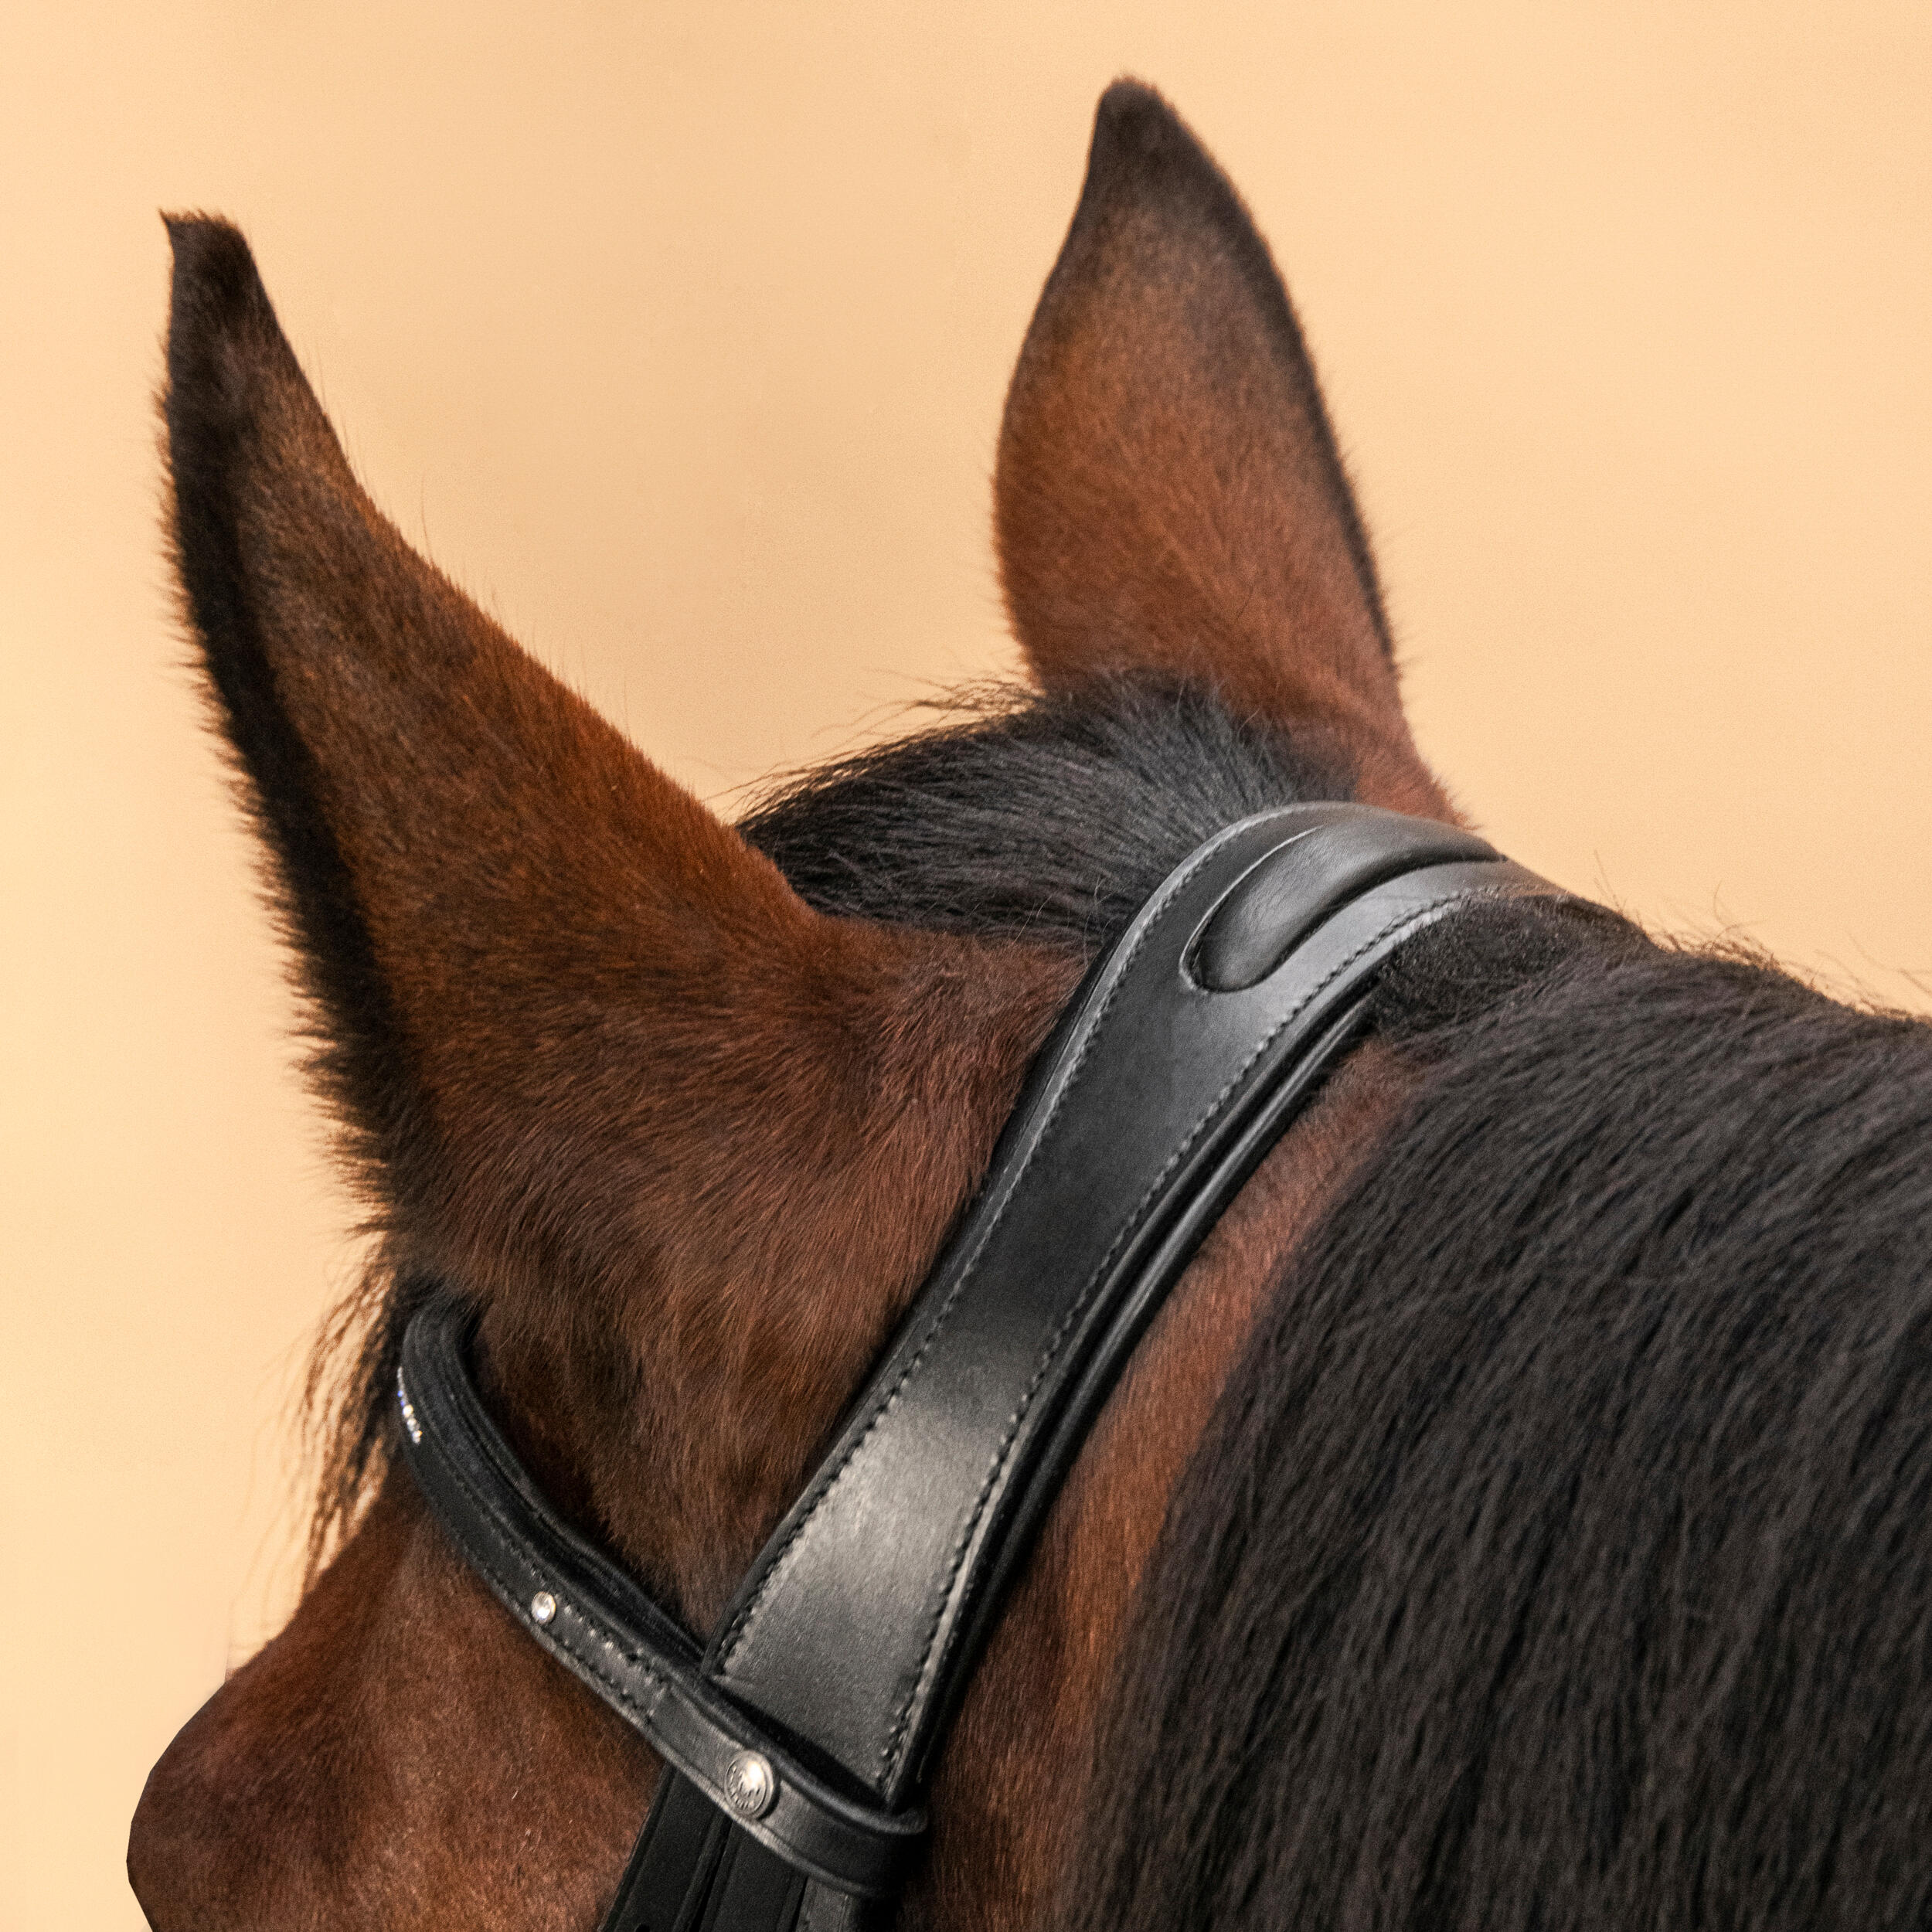 Horse Riding Crossed-Noseband Leather Bridle For Horse and Pony 580 - Black 6/8